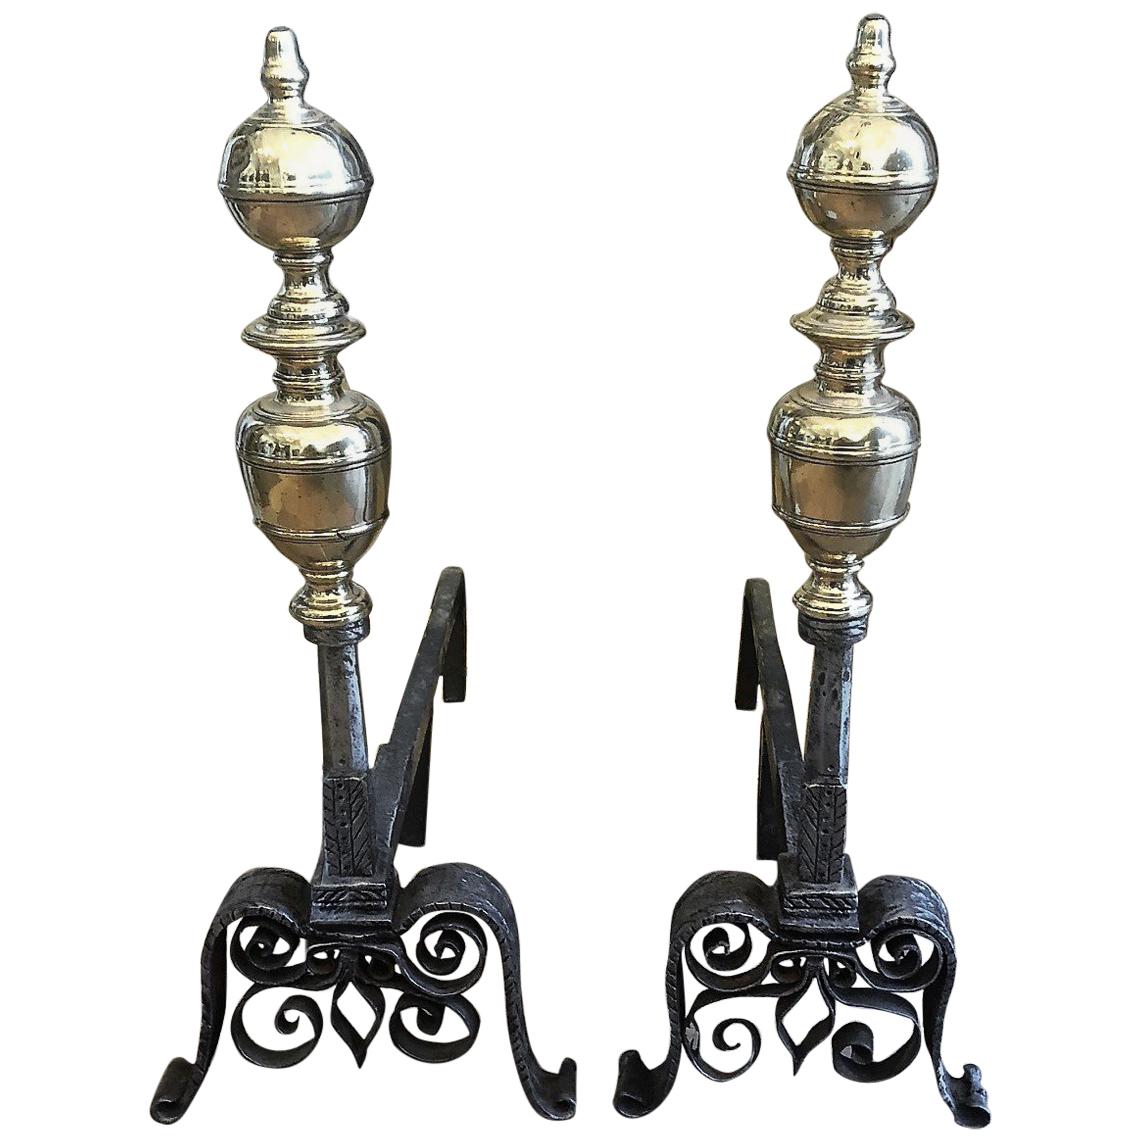 Pair of Andirons with Brass Adornment